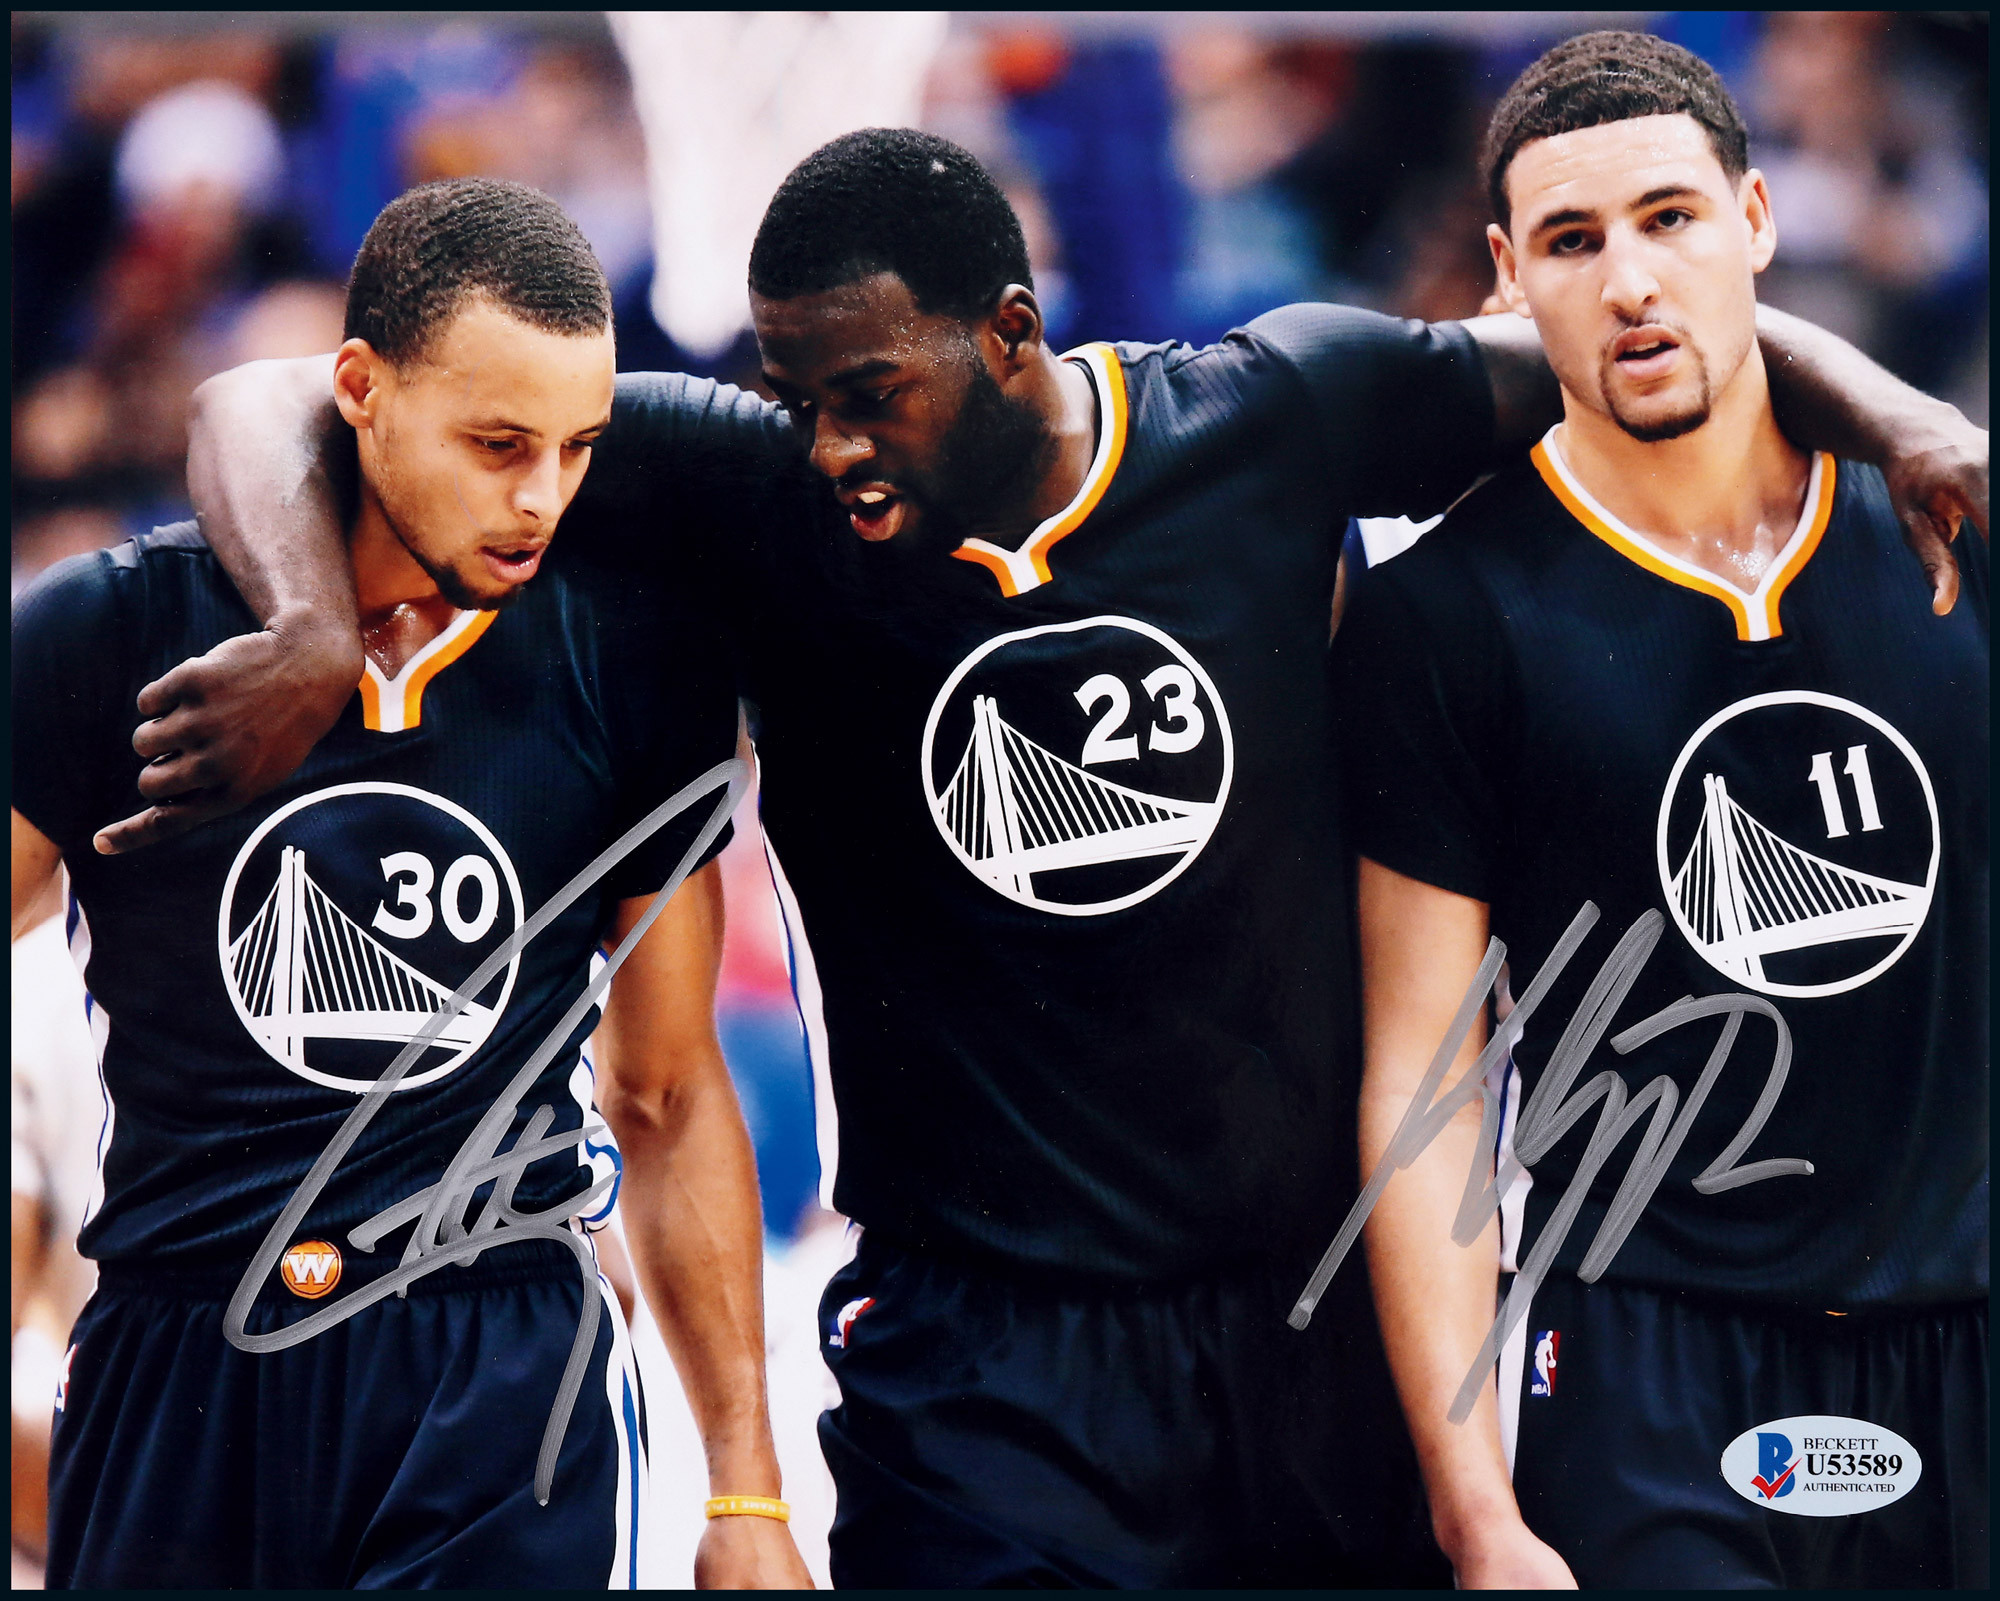 The autographed photo of Stephen Curry and Klay Thompson, the “Splash Brothers”, with certificate